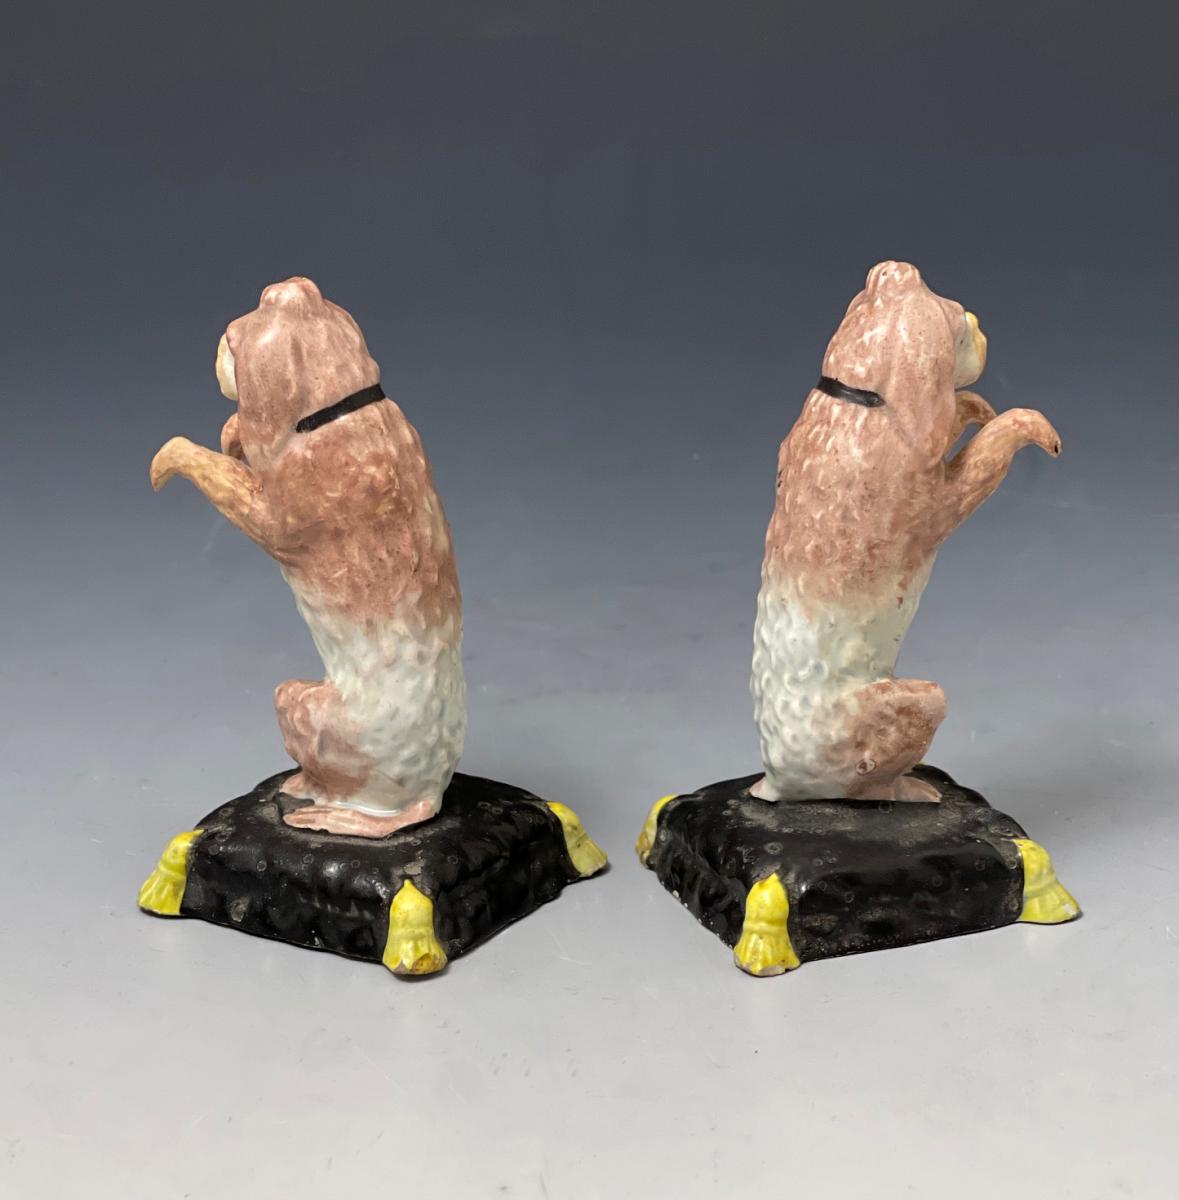 Antique Staffordshire pottery pearlware figures of begging Spaniel dogs circa 1820